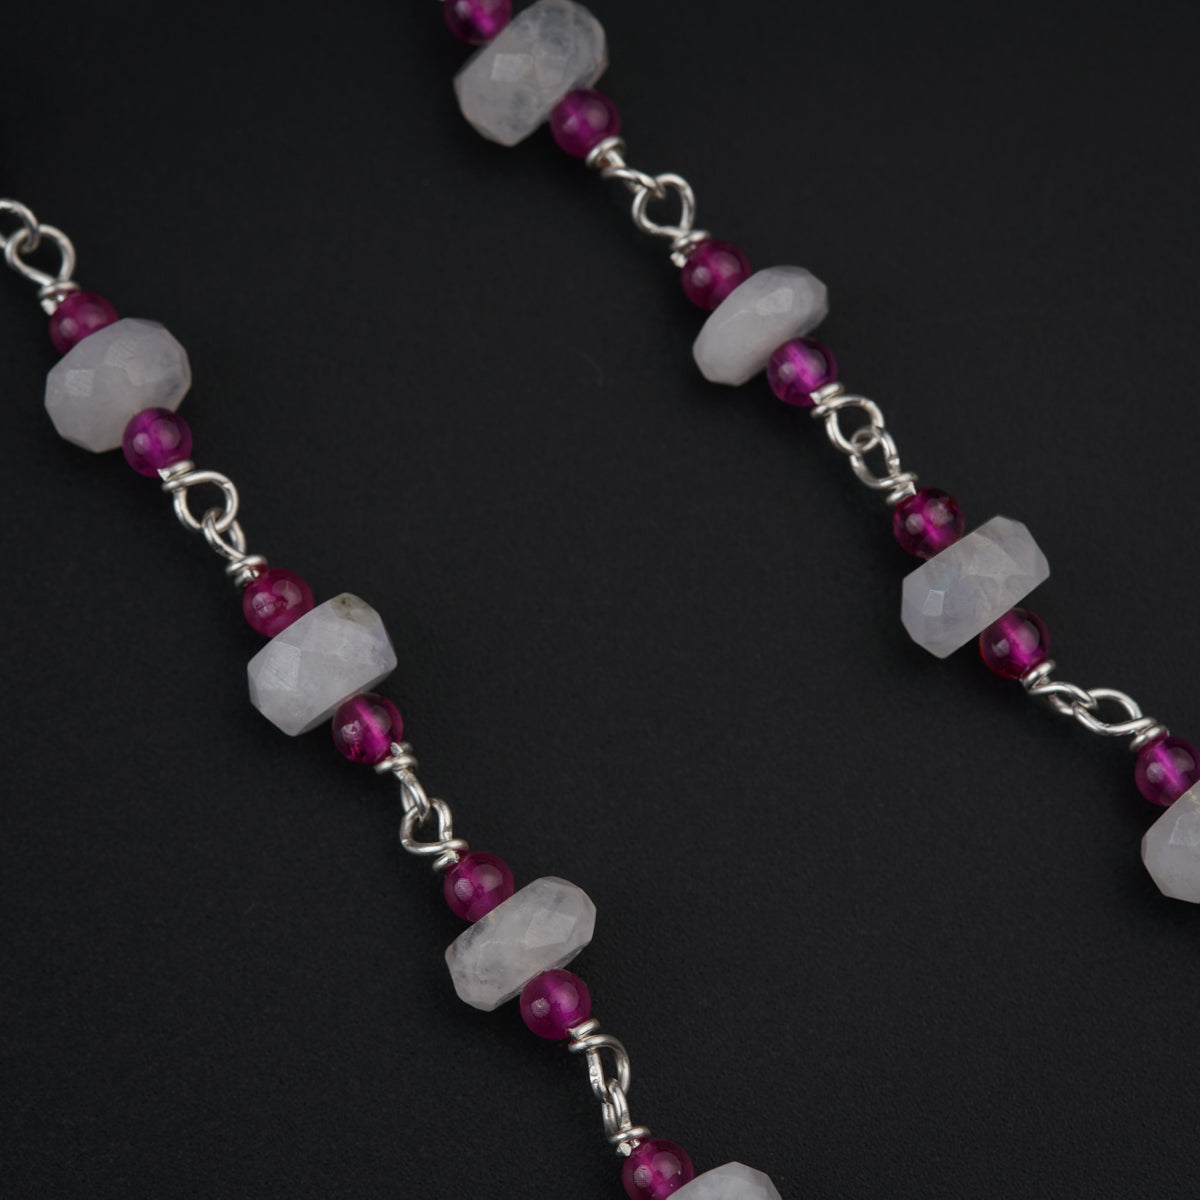 a pair of silver and pink beads on a black background